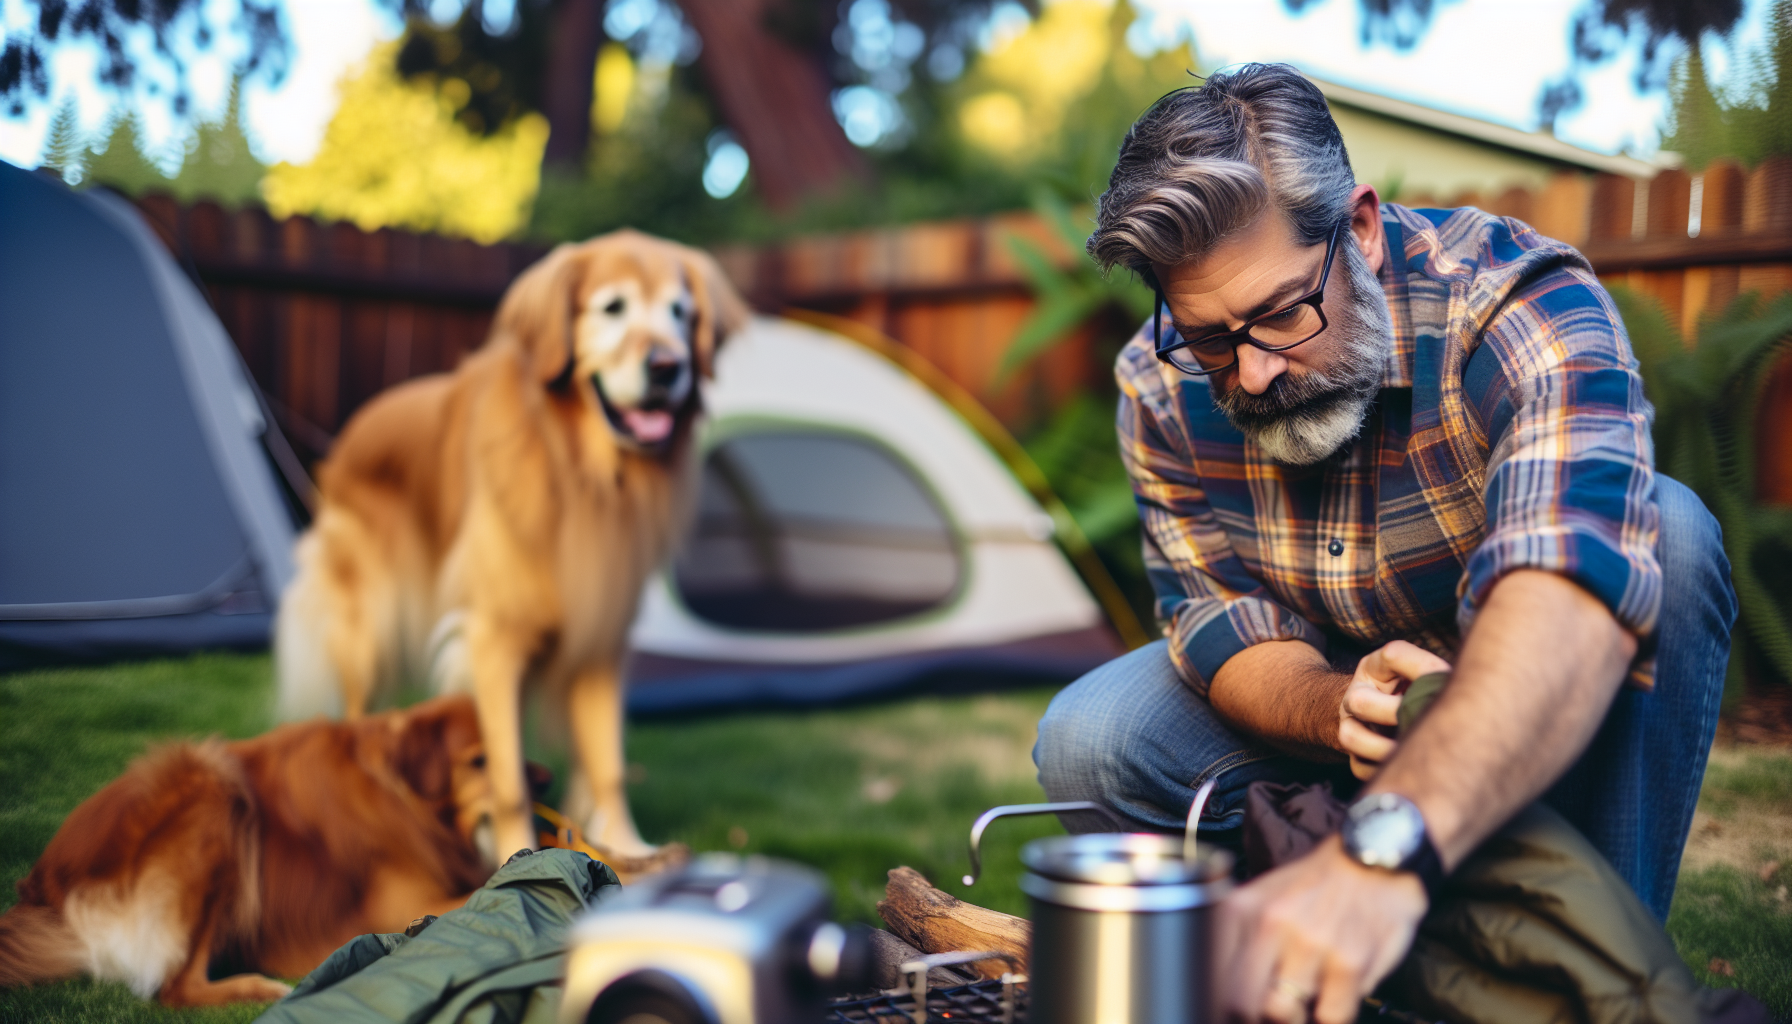 A person preparing camping gear with a dog waiting nearby